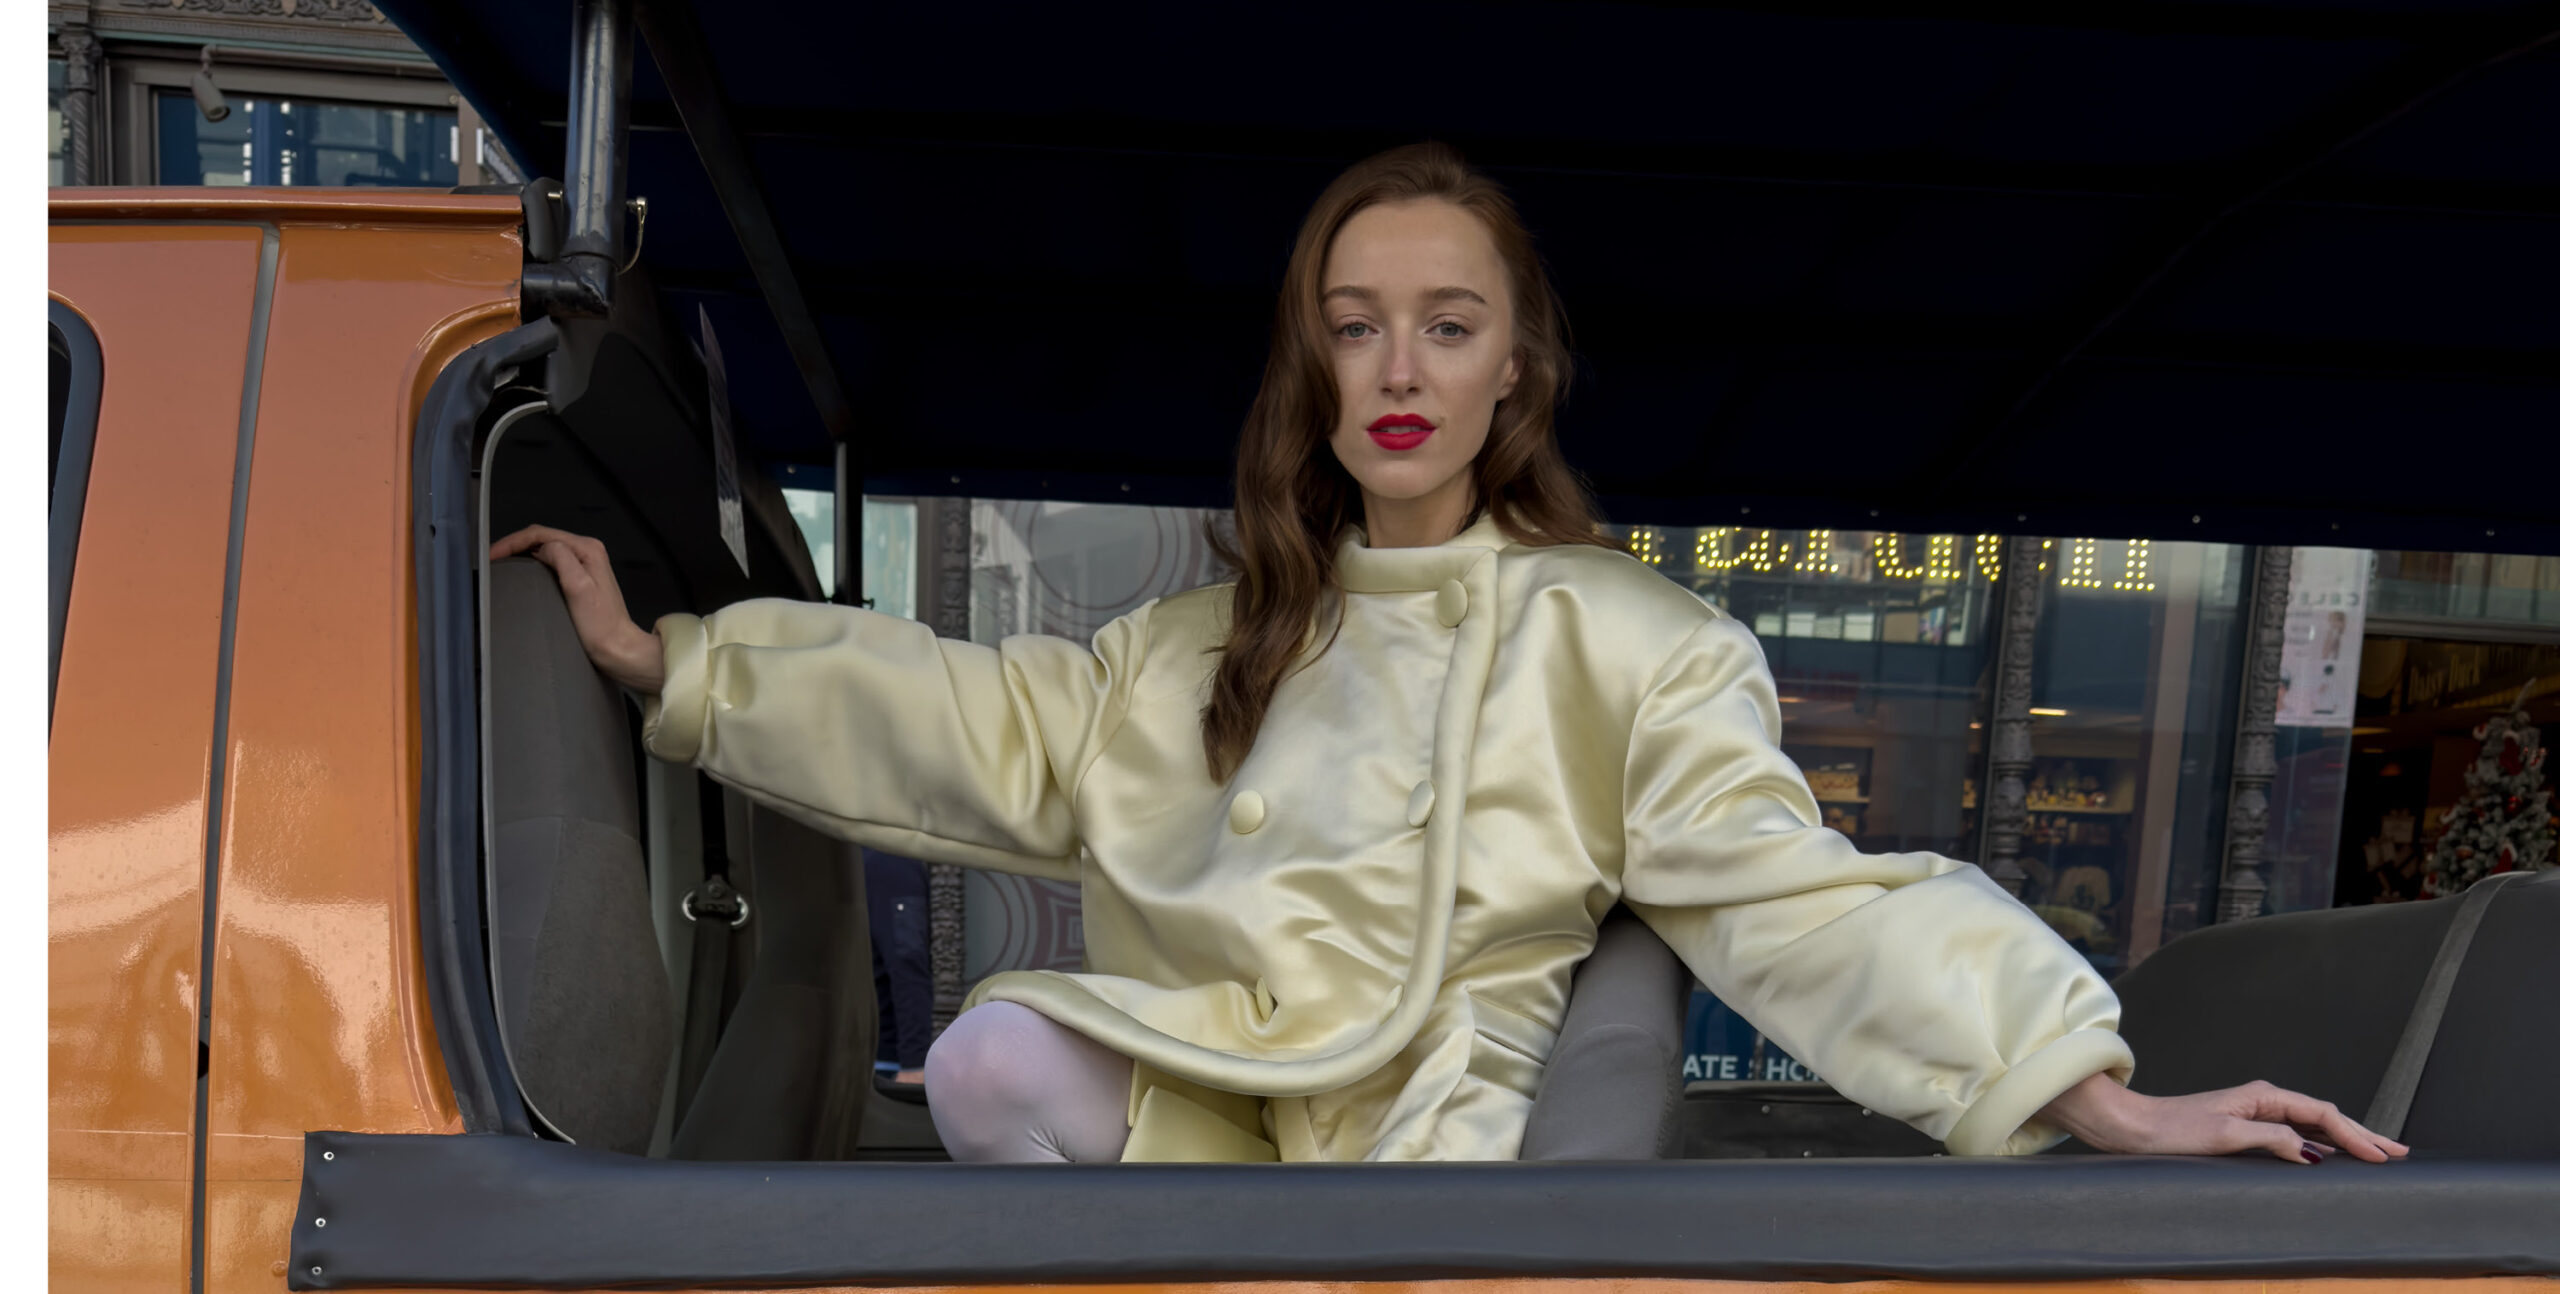 Phoebe Dynevor strikes a pose for W Magazine, sitting elegantly in an open vehicle. She wears a pale yellow satin jacket with bold button details, adding a touch of soft glamour to the urban setting. Her red lipstick contrasts with her light outfit, and her relaxed yet poised demeanor exudes a modern sophistication. Behind her, the city life blurs into the background, focusing all attention on her striking figure.